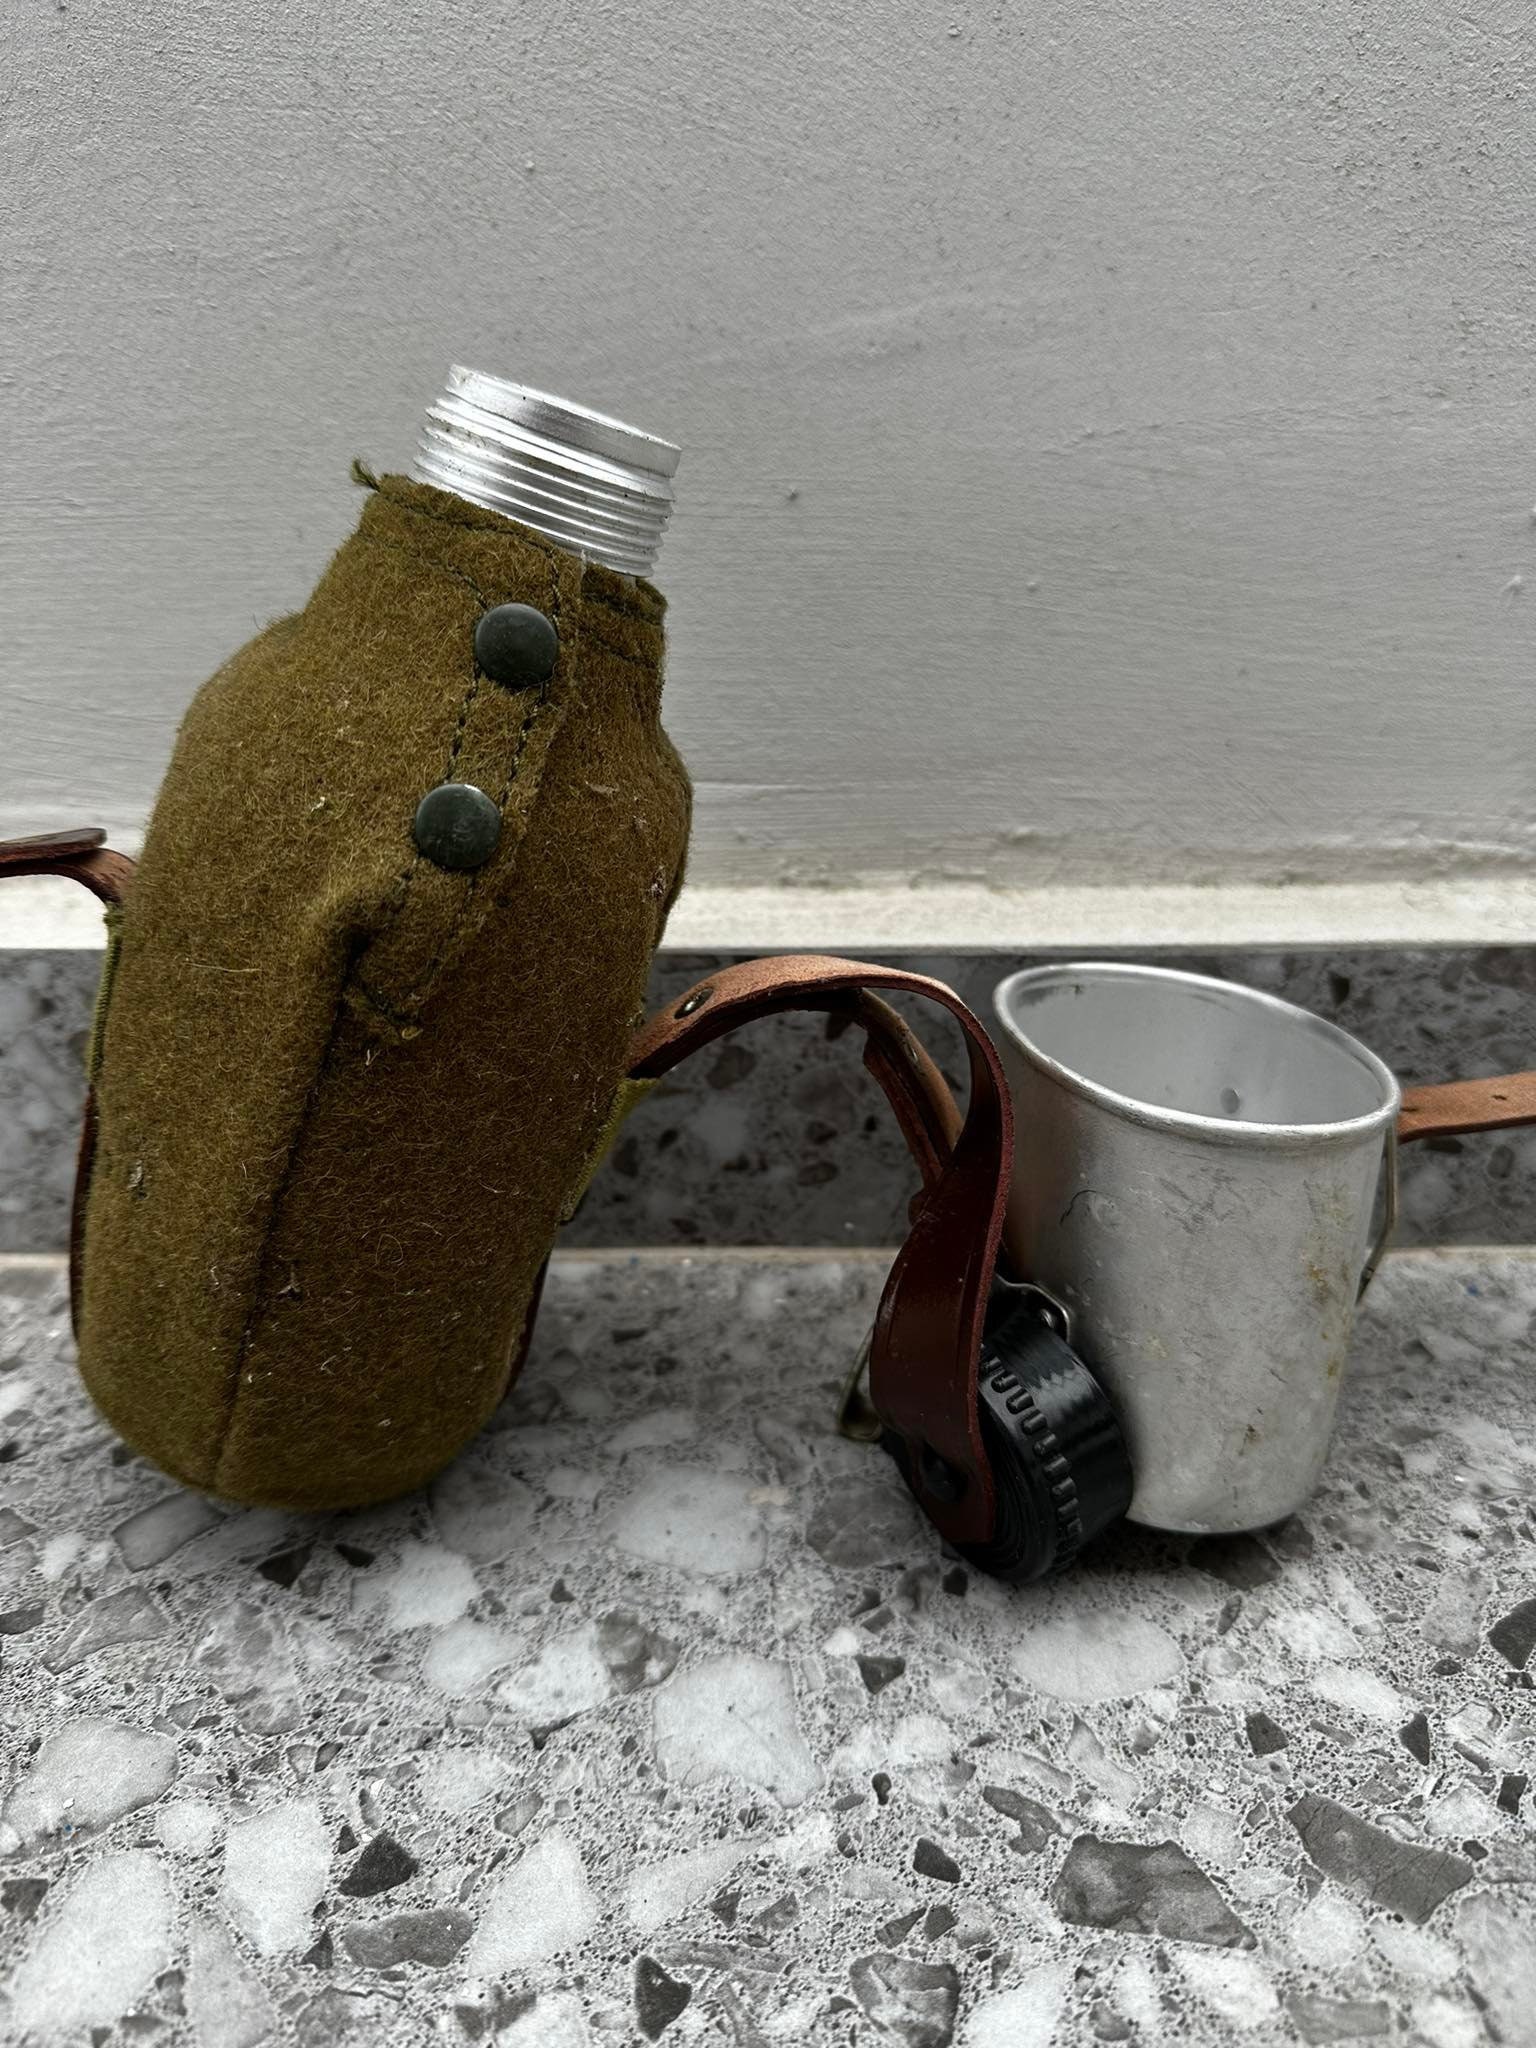 Romanian Army Military Canteen With Cup & Cover 32 ounce Genuine